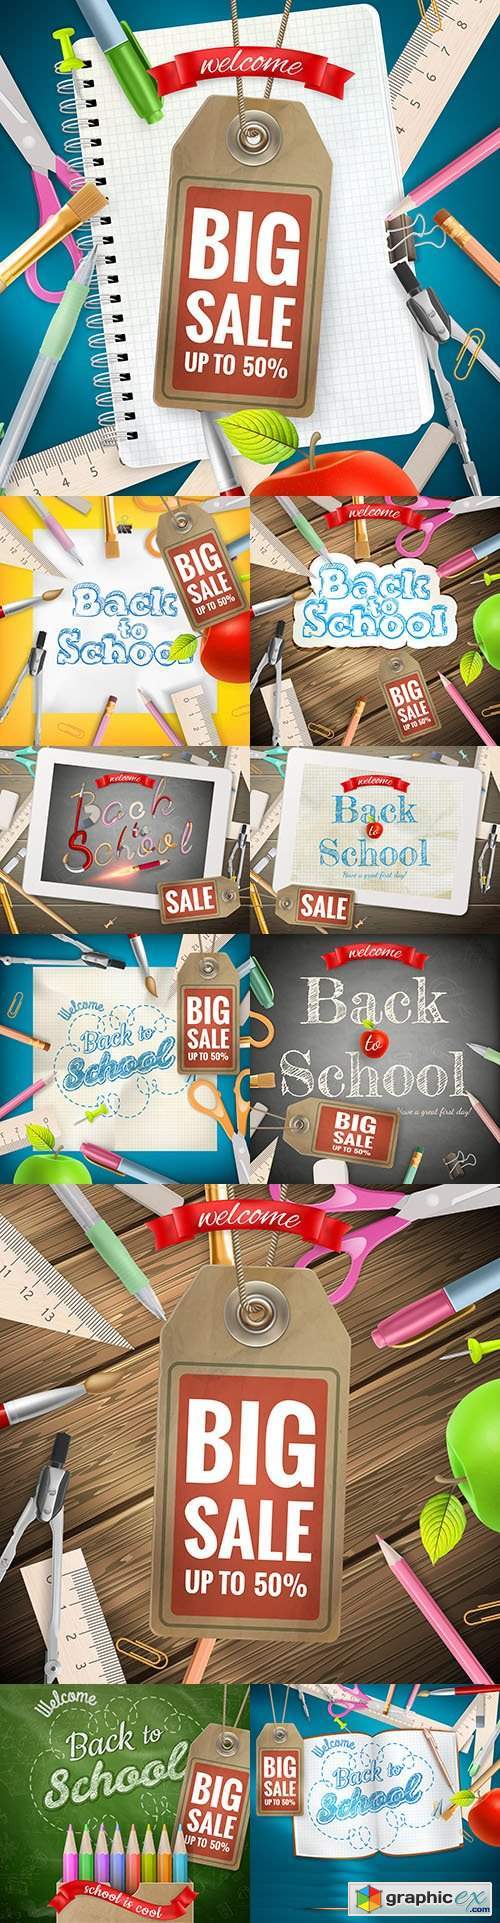 Back to school and accessories collection illustration 47